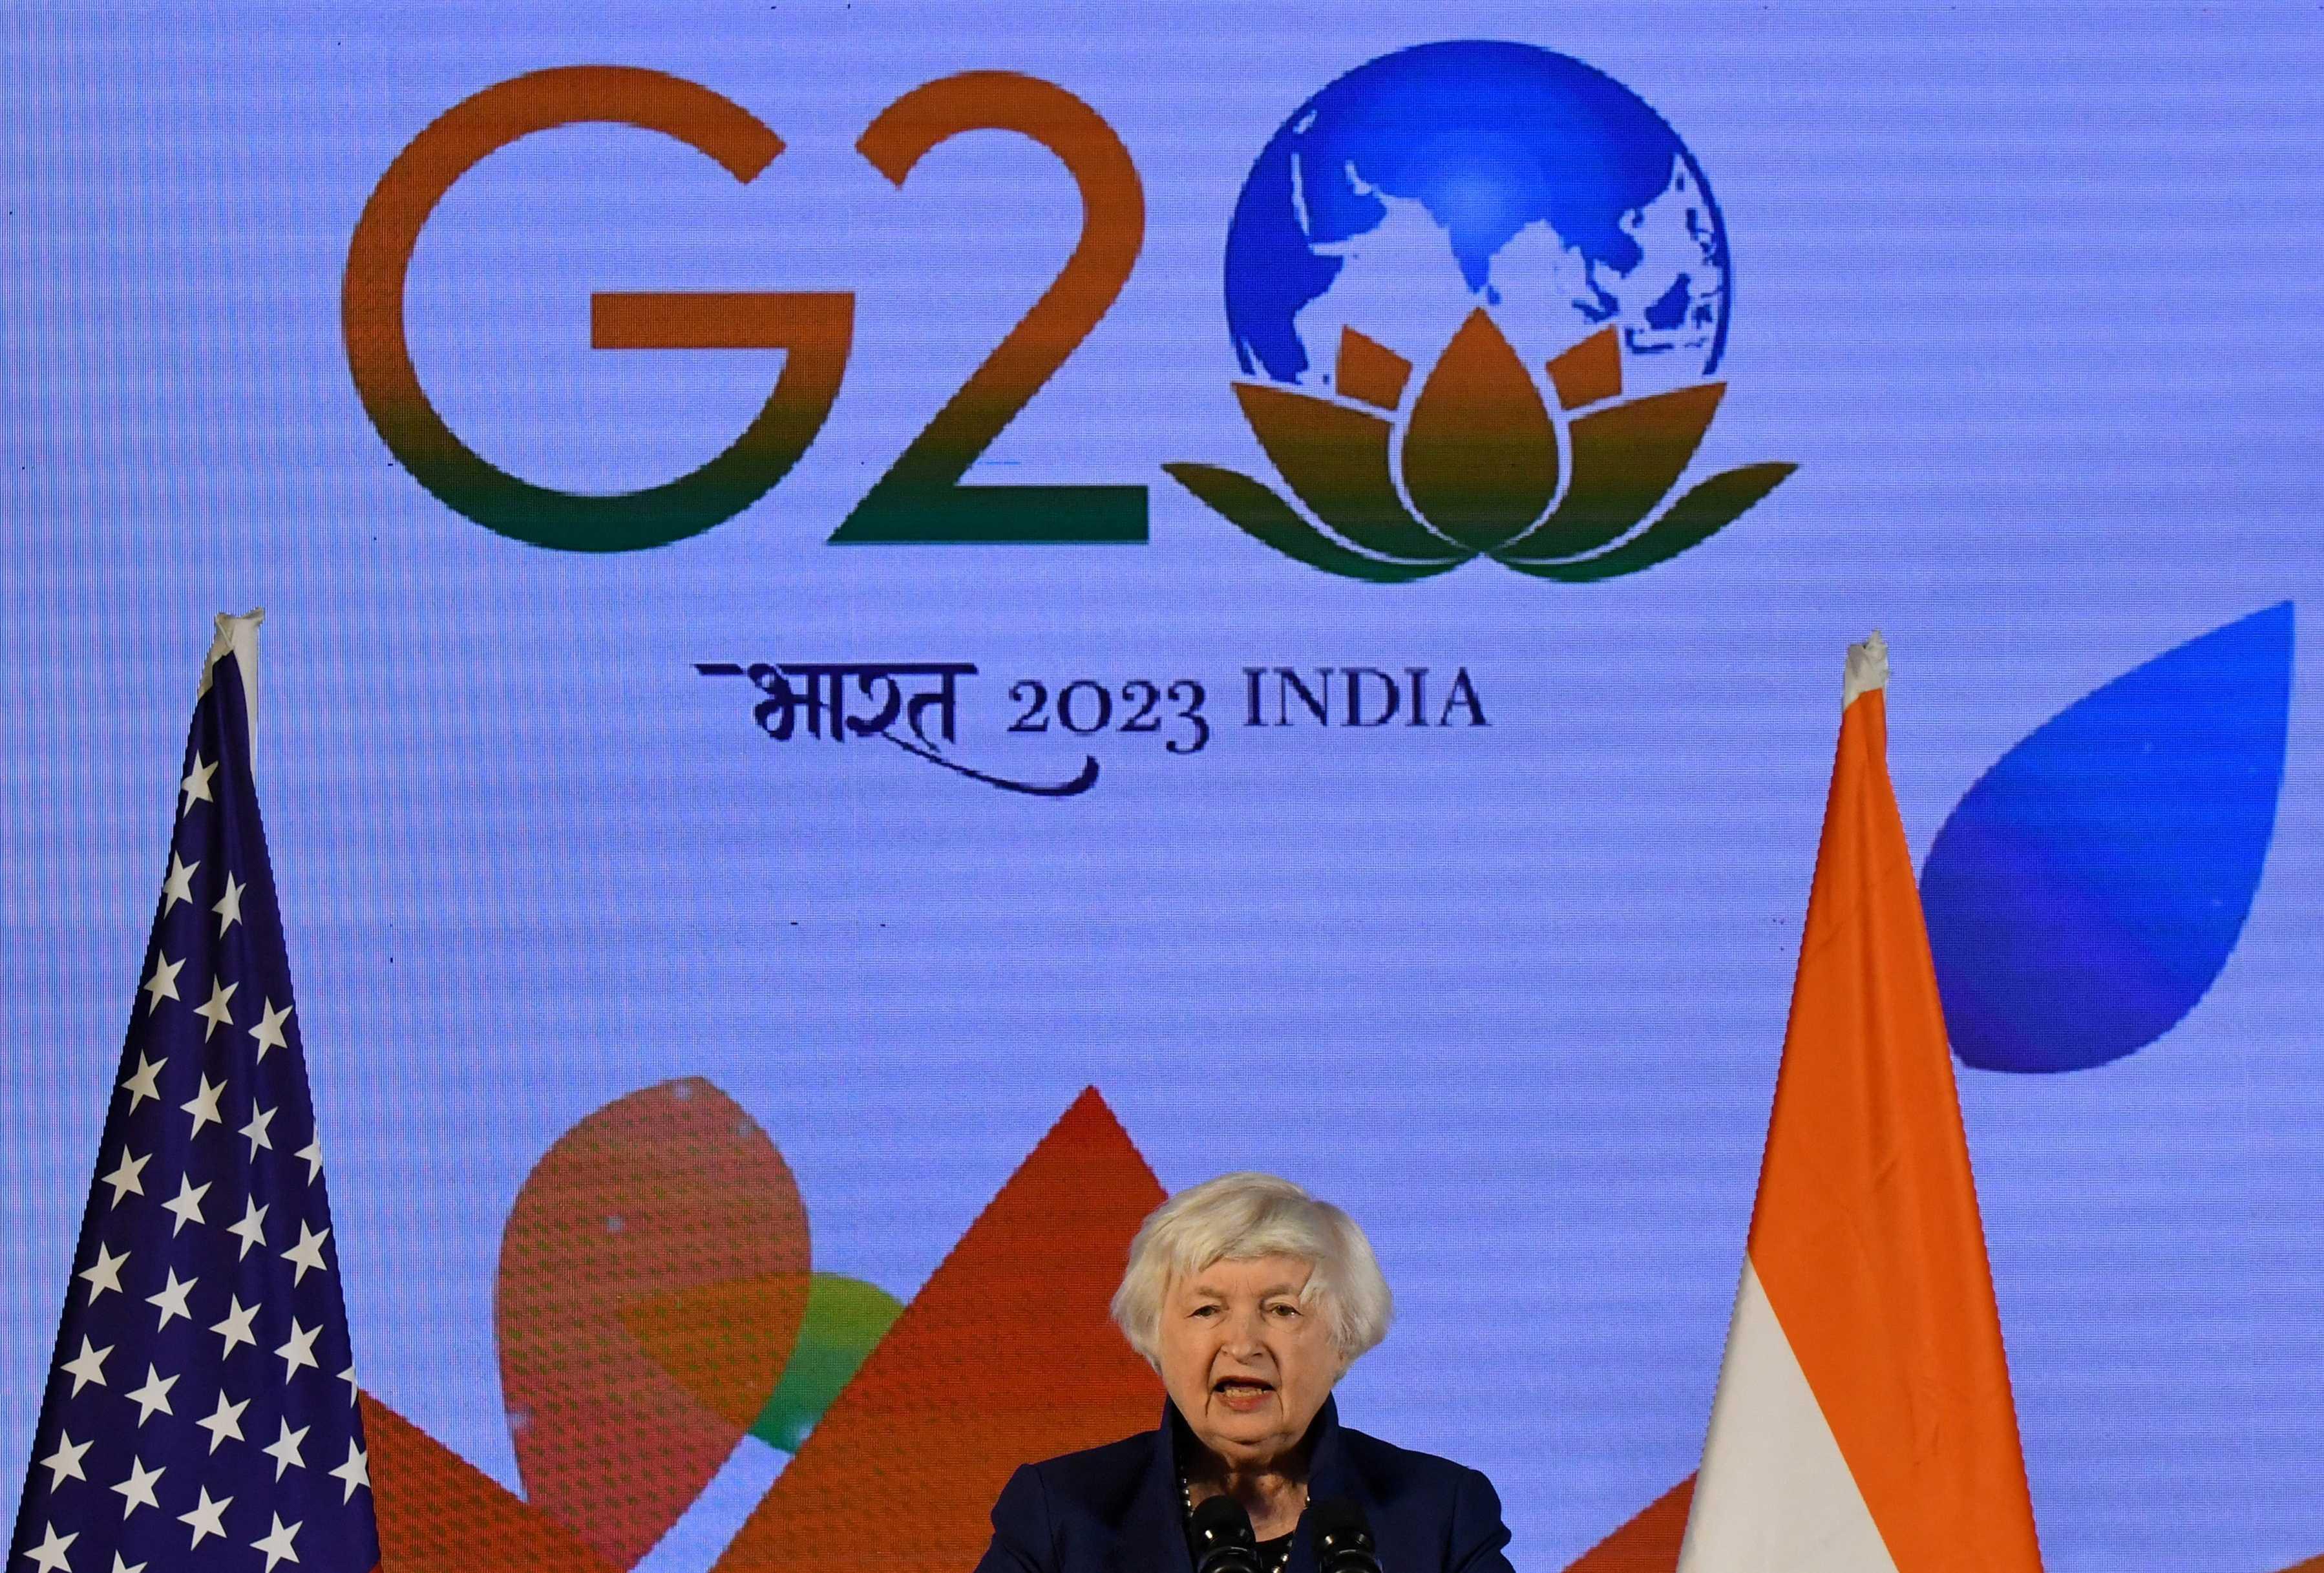 US Treasury Secretary Janet Yellen speaks during a news conference as G20 finance leaders gather on the outskirts of Bengaluru, India, Feb 23. Photo: Reuters